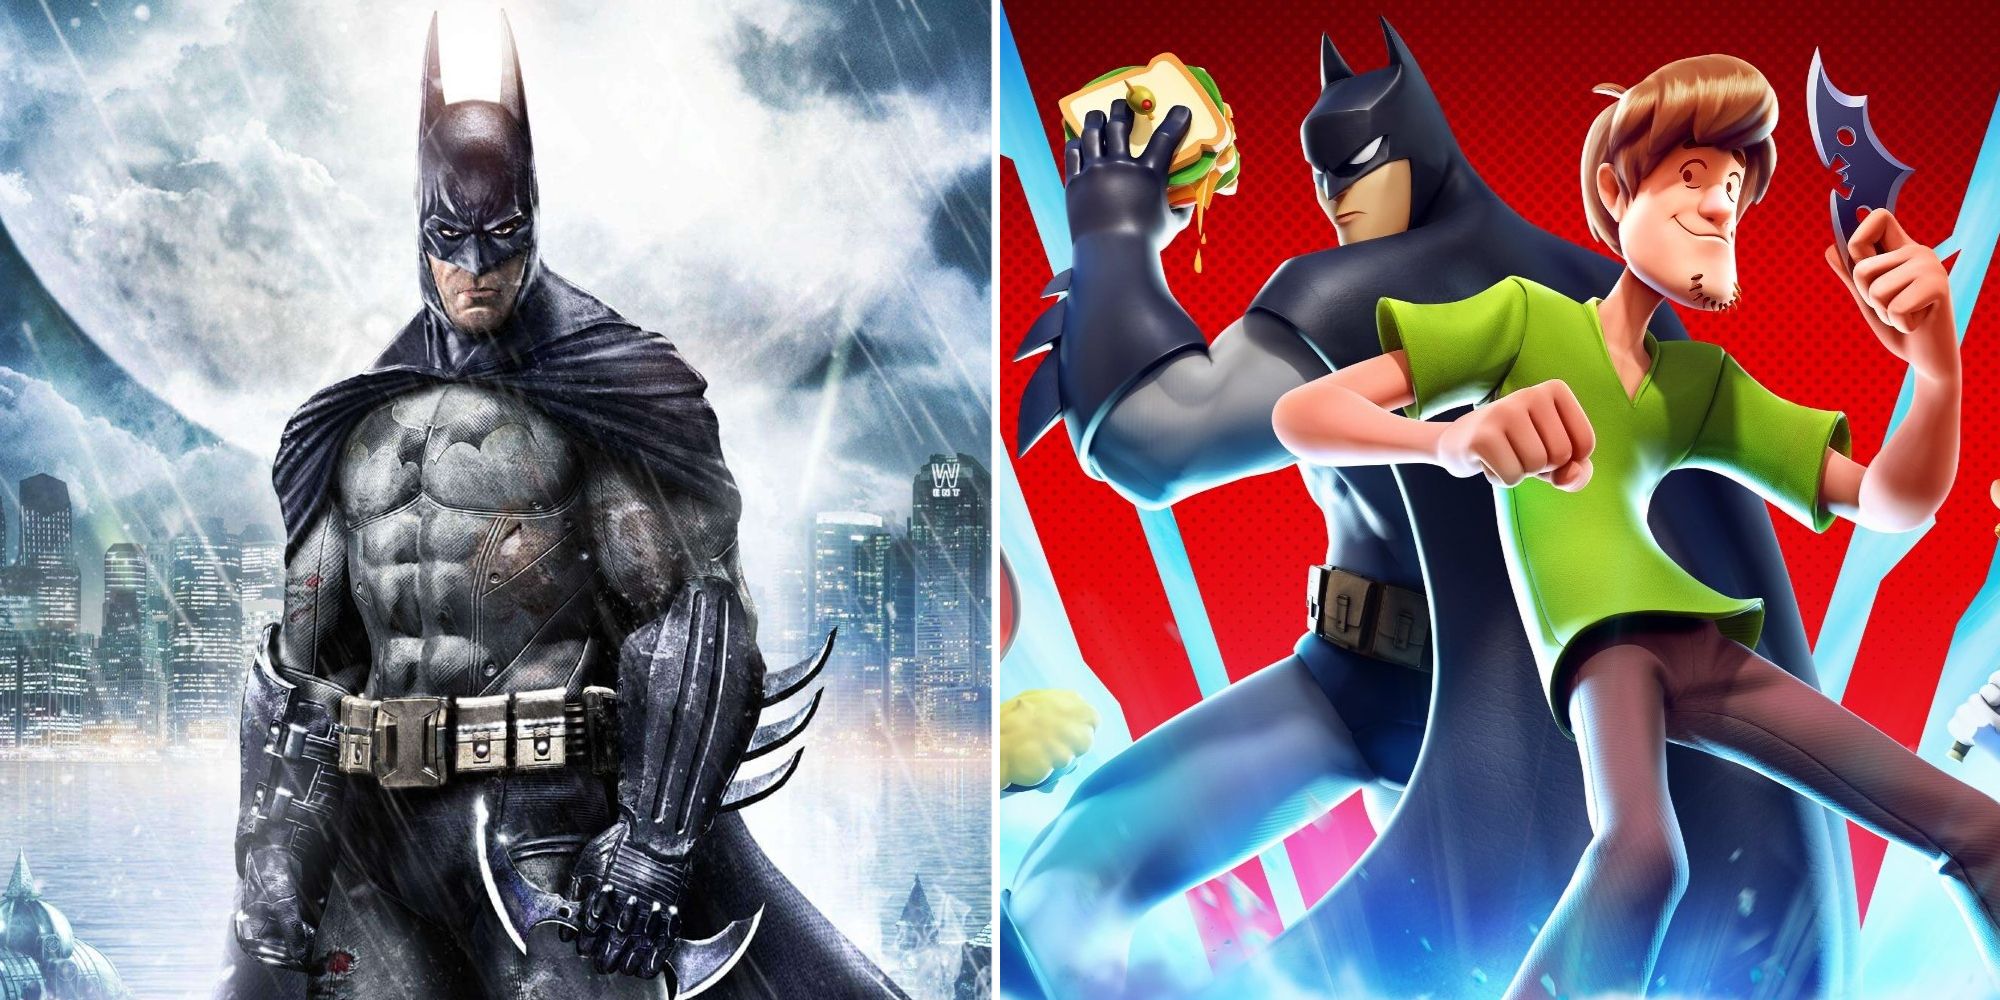 Batman standing in the rain on the cover of Batman Arkham Asylum while a sandwich-holding Batman stands next to a Batrang-holding Shaggy on the cover of MultiVersus